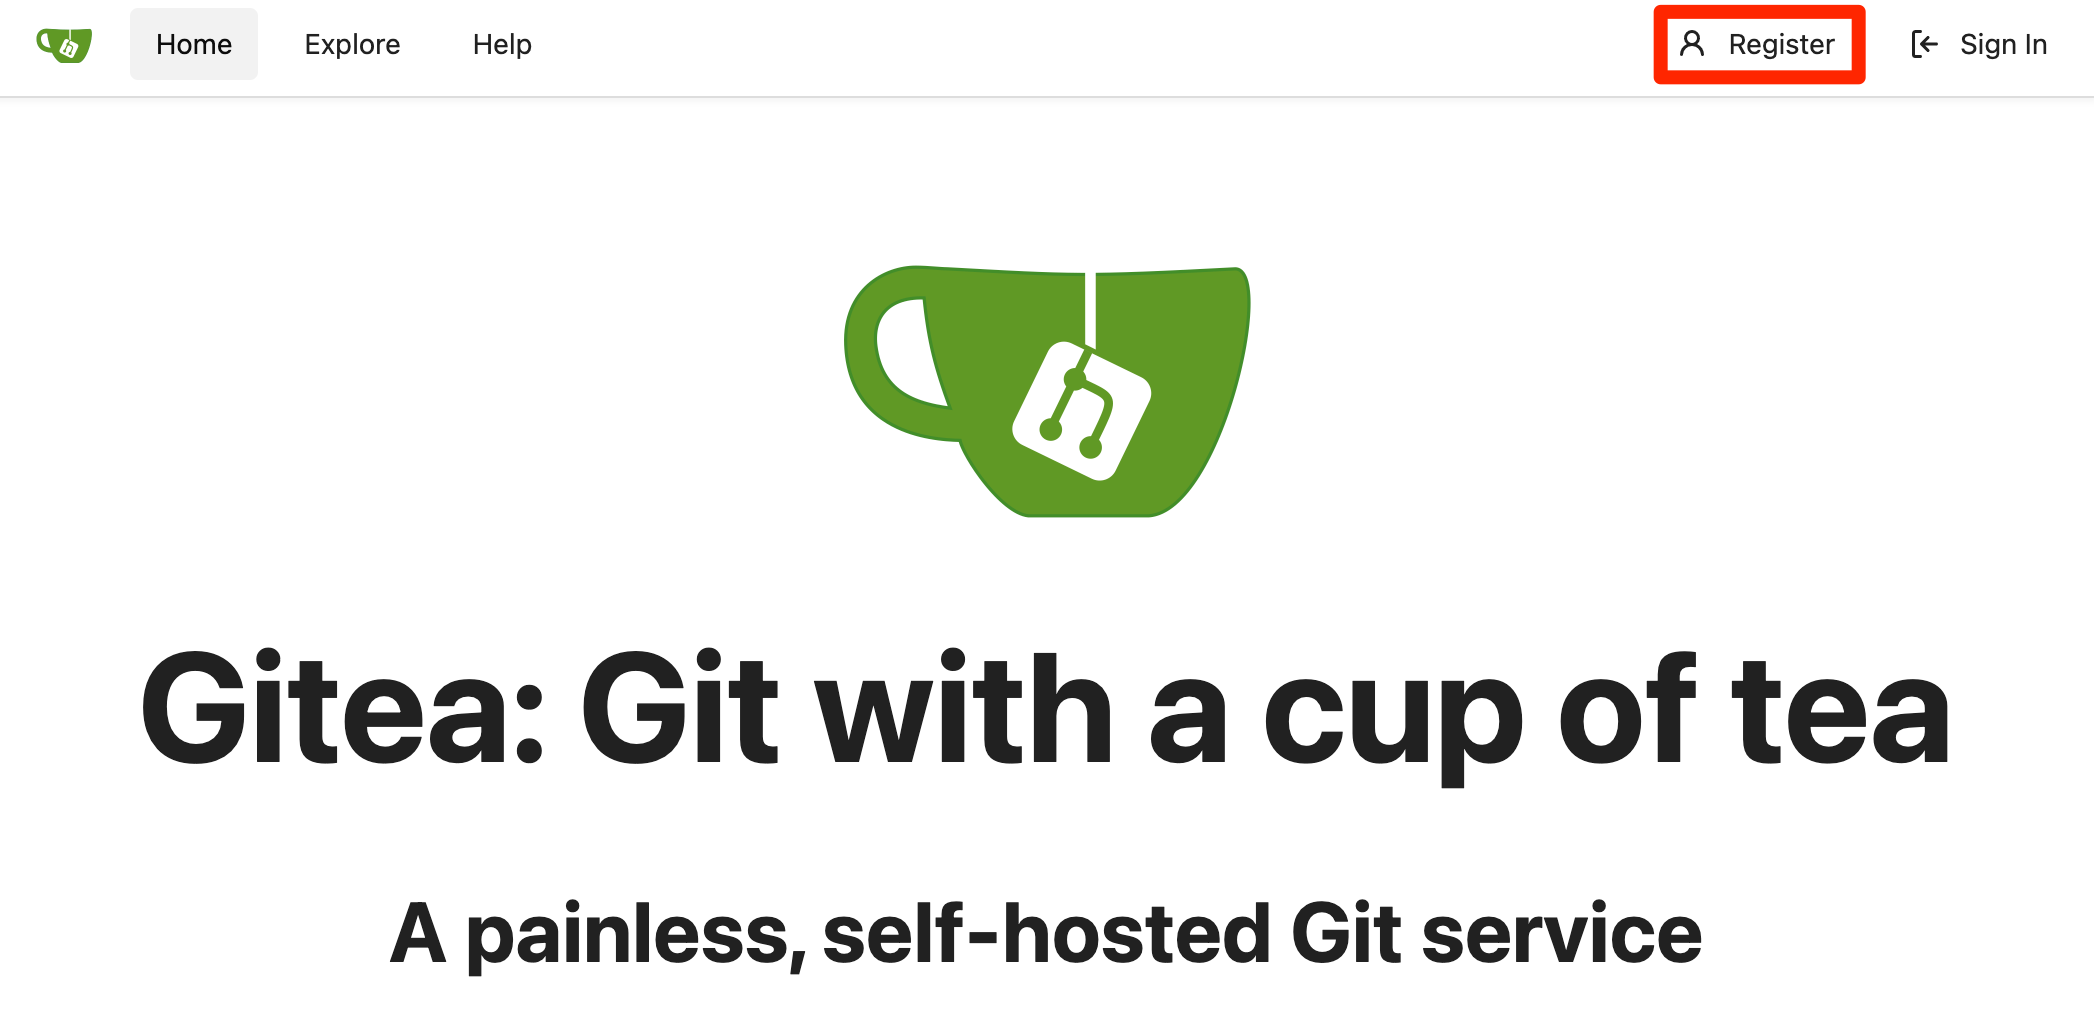 The Gitea welcome page.